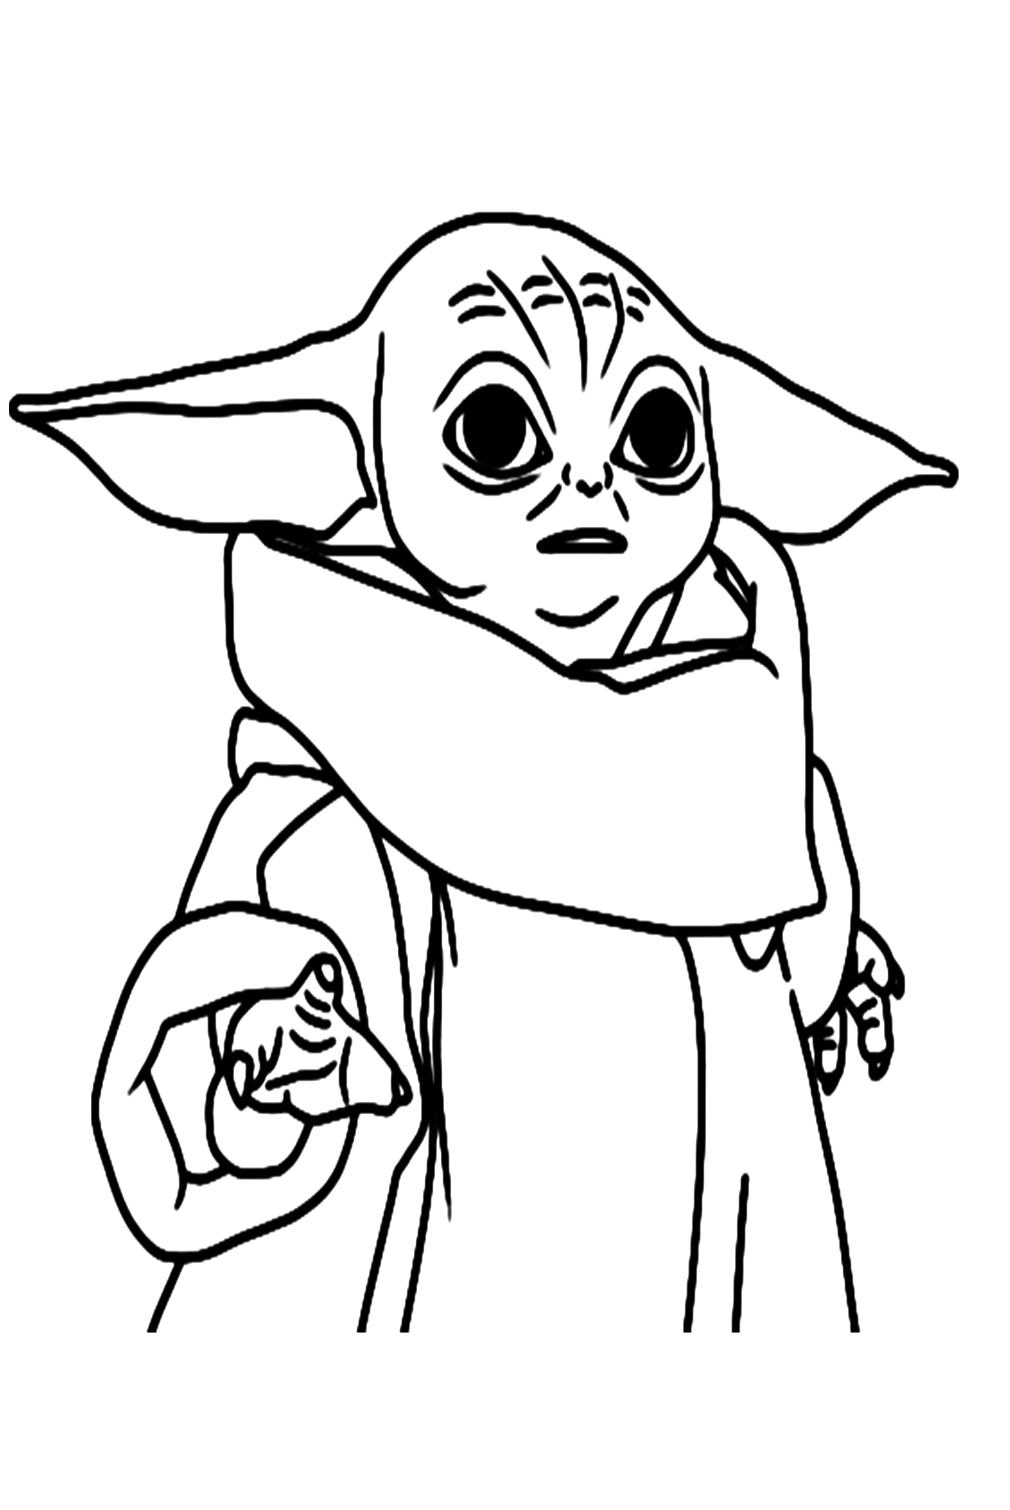 Baby Yoda Wear Scarf Coloring Pages